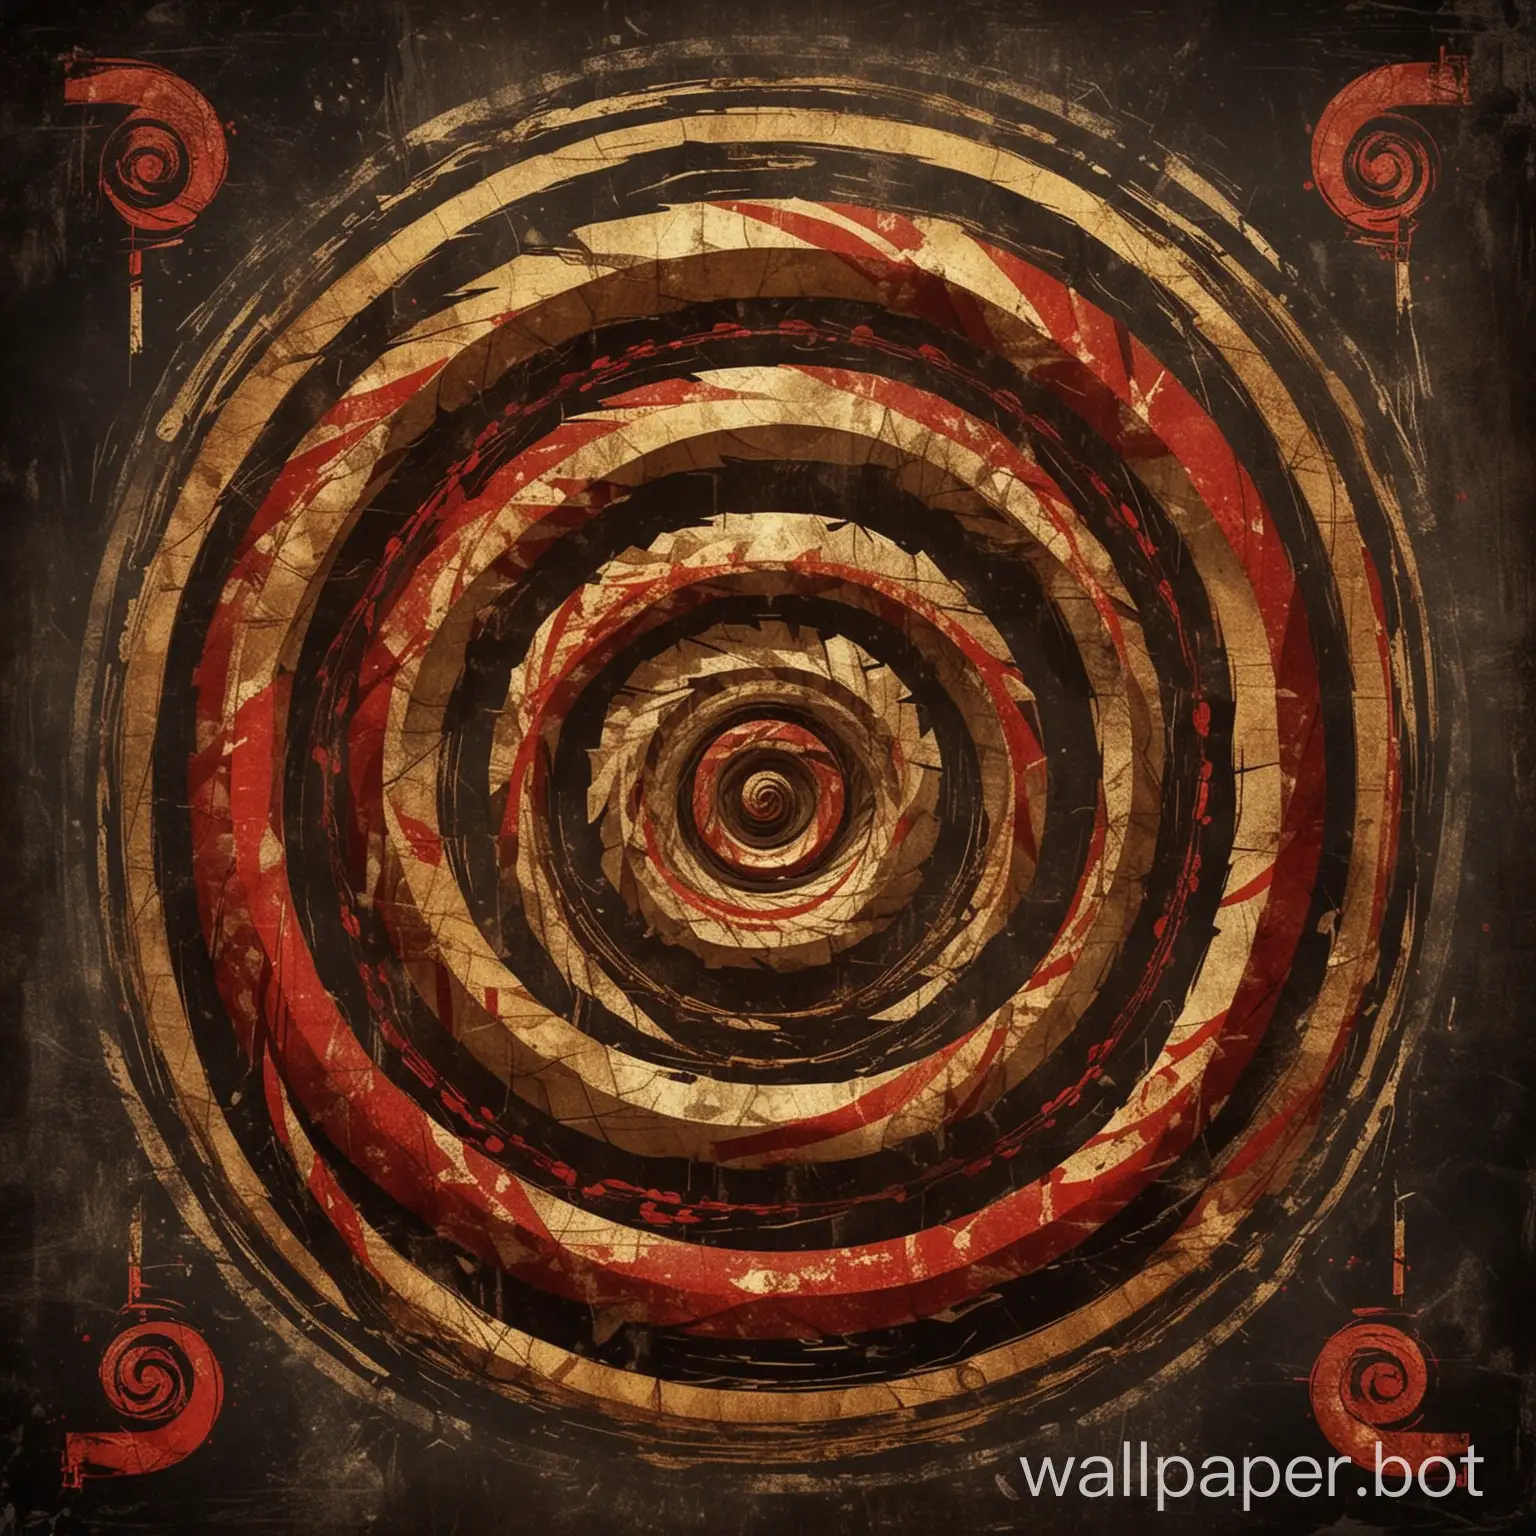 spiral energy on vintage poster, dark colors with red and gold accents